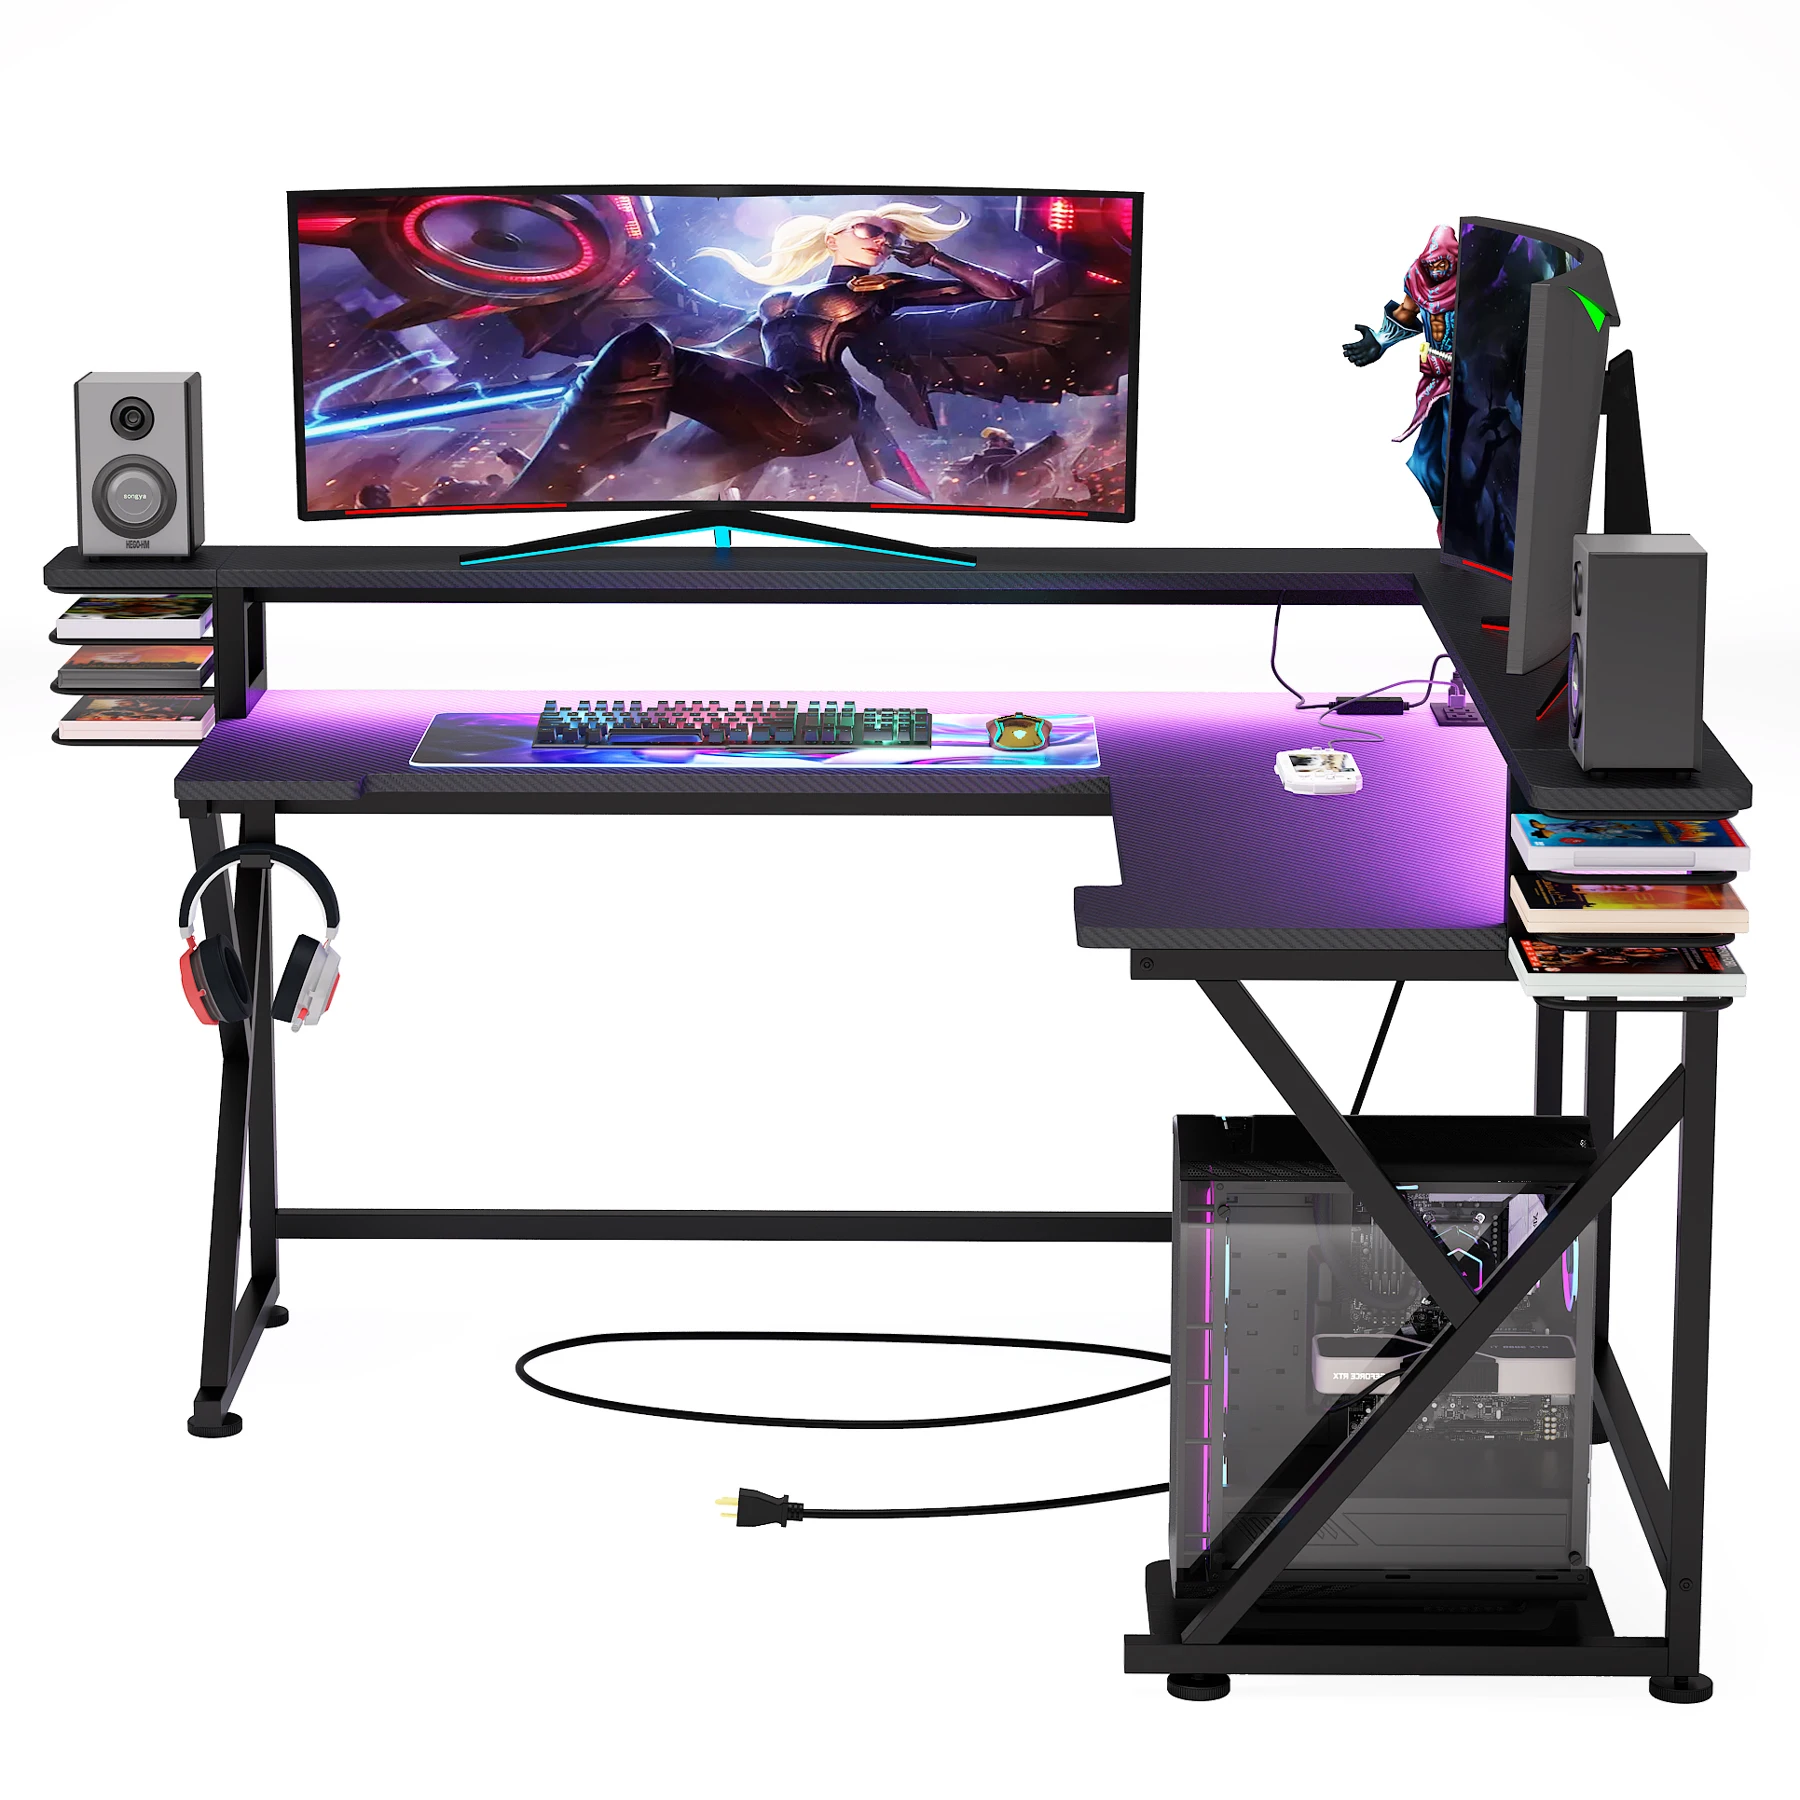 All-in-one PC Gaming Desk Cool Shape LED RGB Light Computer Desk Racing Style Office Table For Gamer